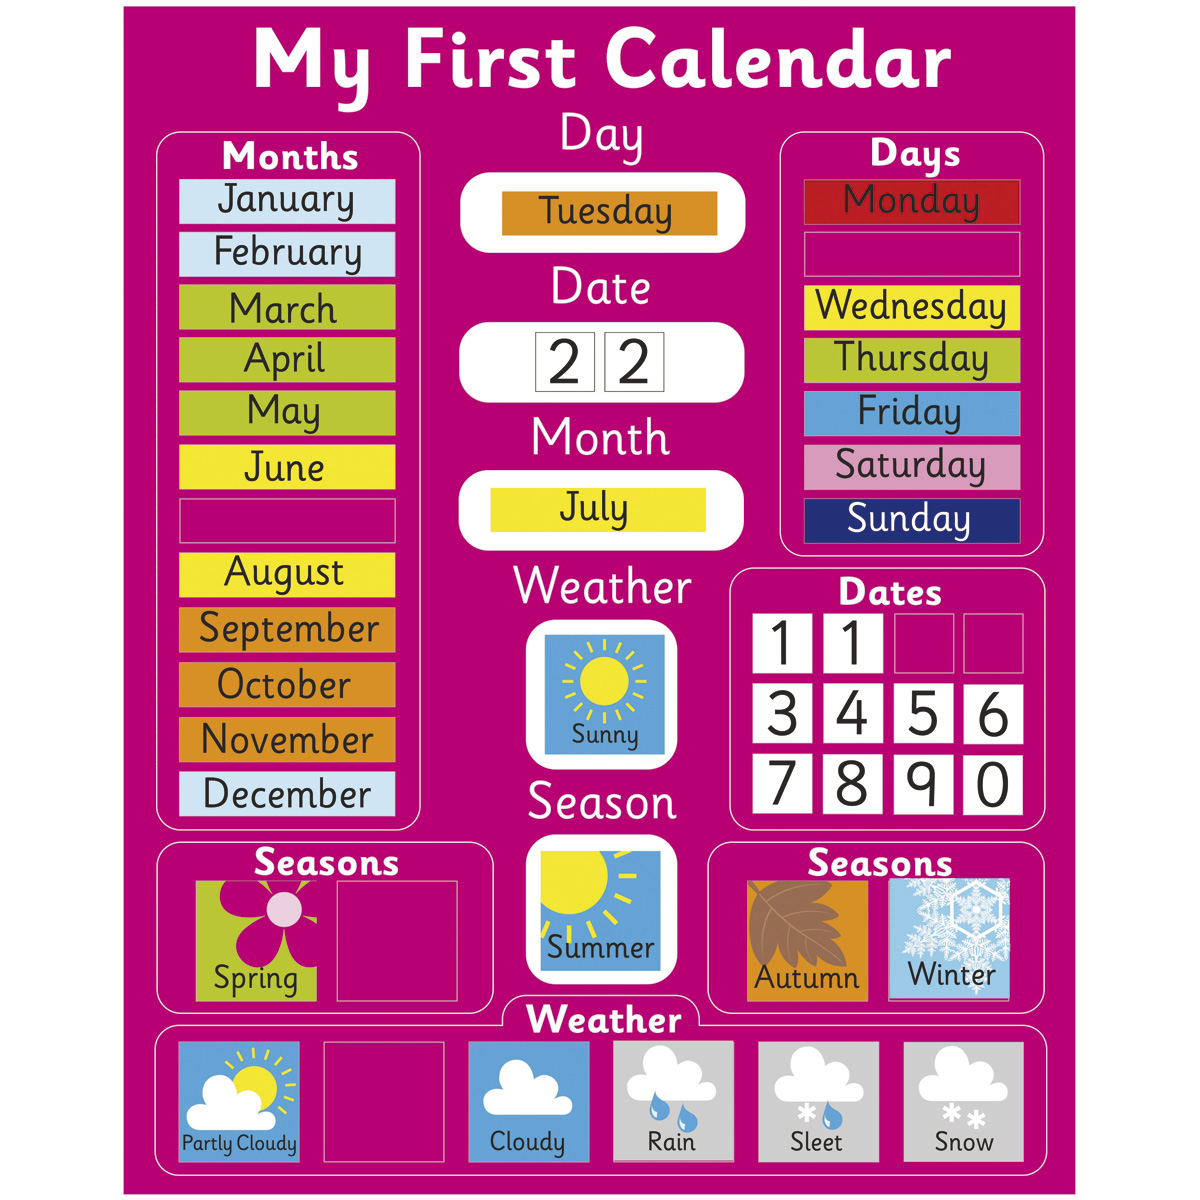 My First Calendar (Pink) Educational Toys Mulberry Bush